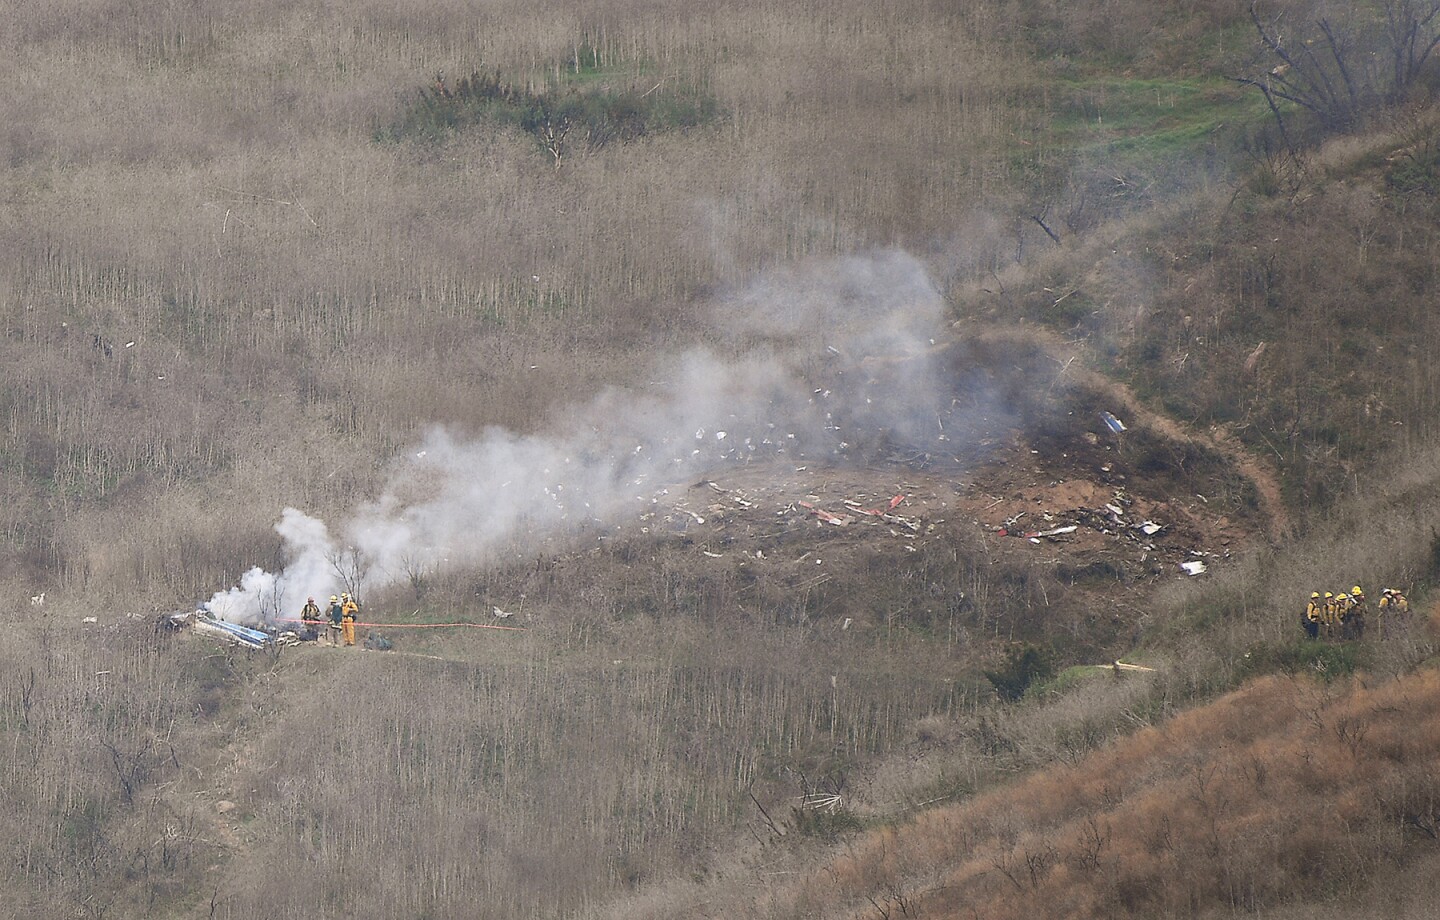 The crash site of the helecopter Kobe Bryant was believed to be in on Sunday, Jan 26, 2020 in Calabasas.